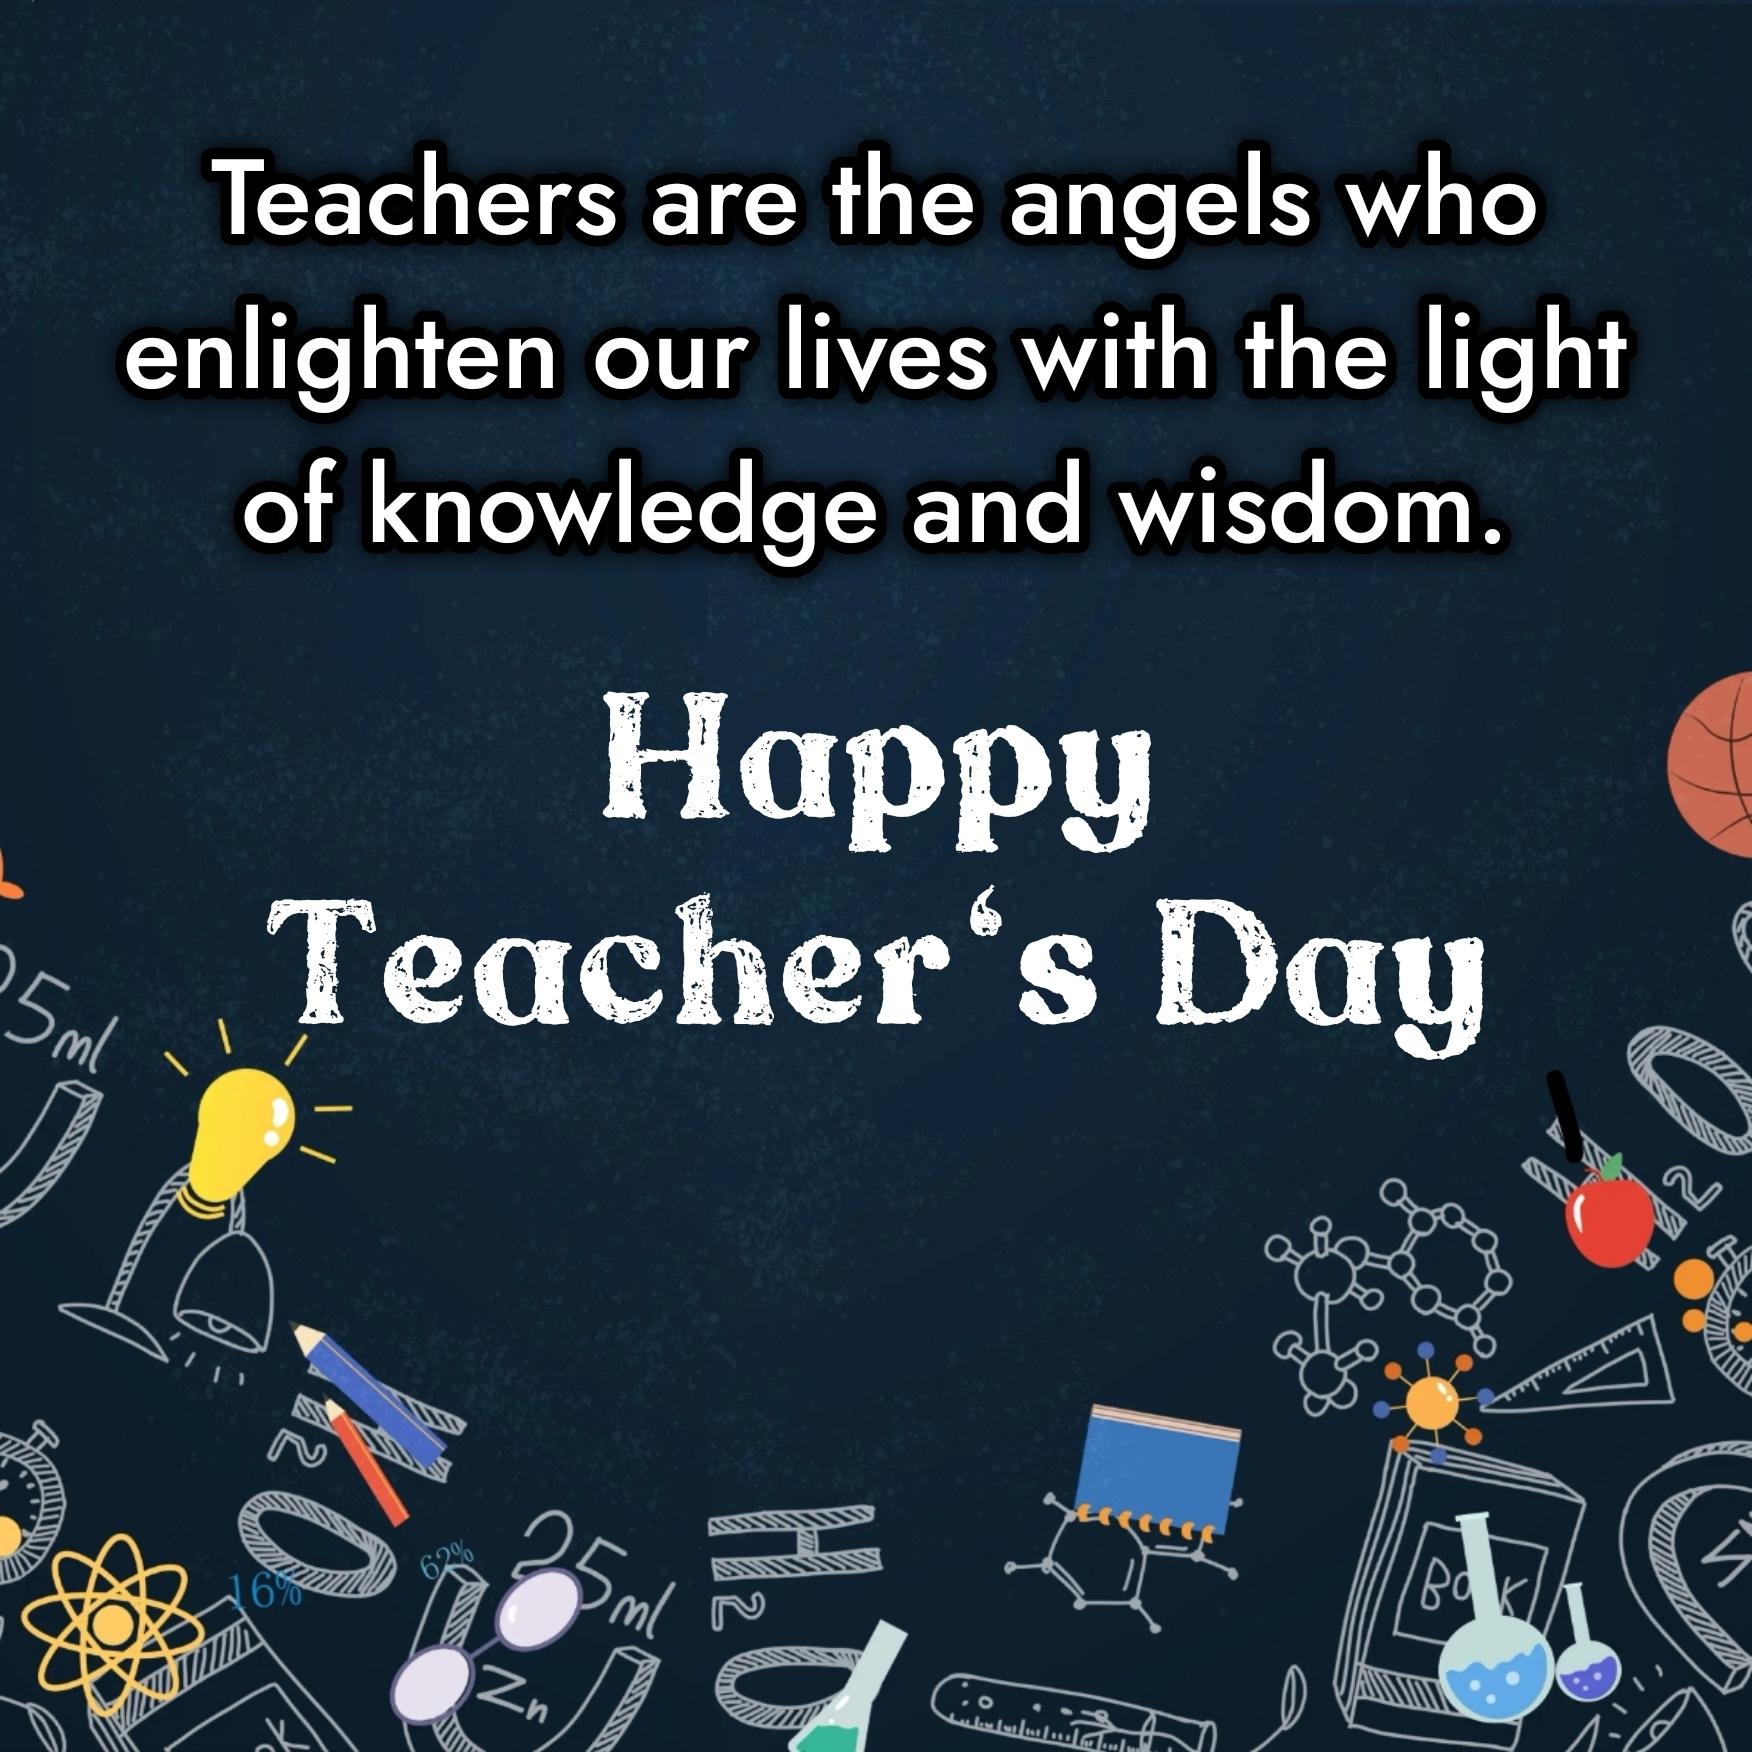 Teachers are the angels who enlighten our lives